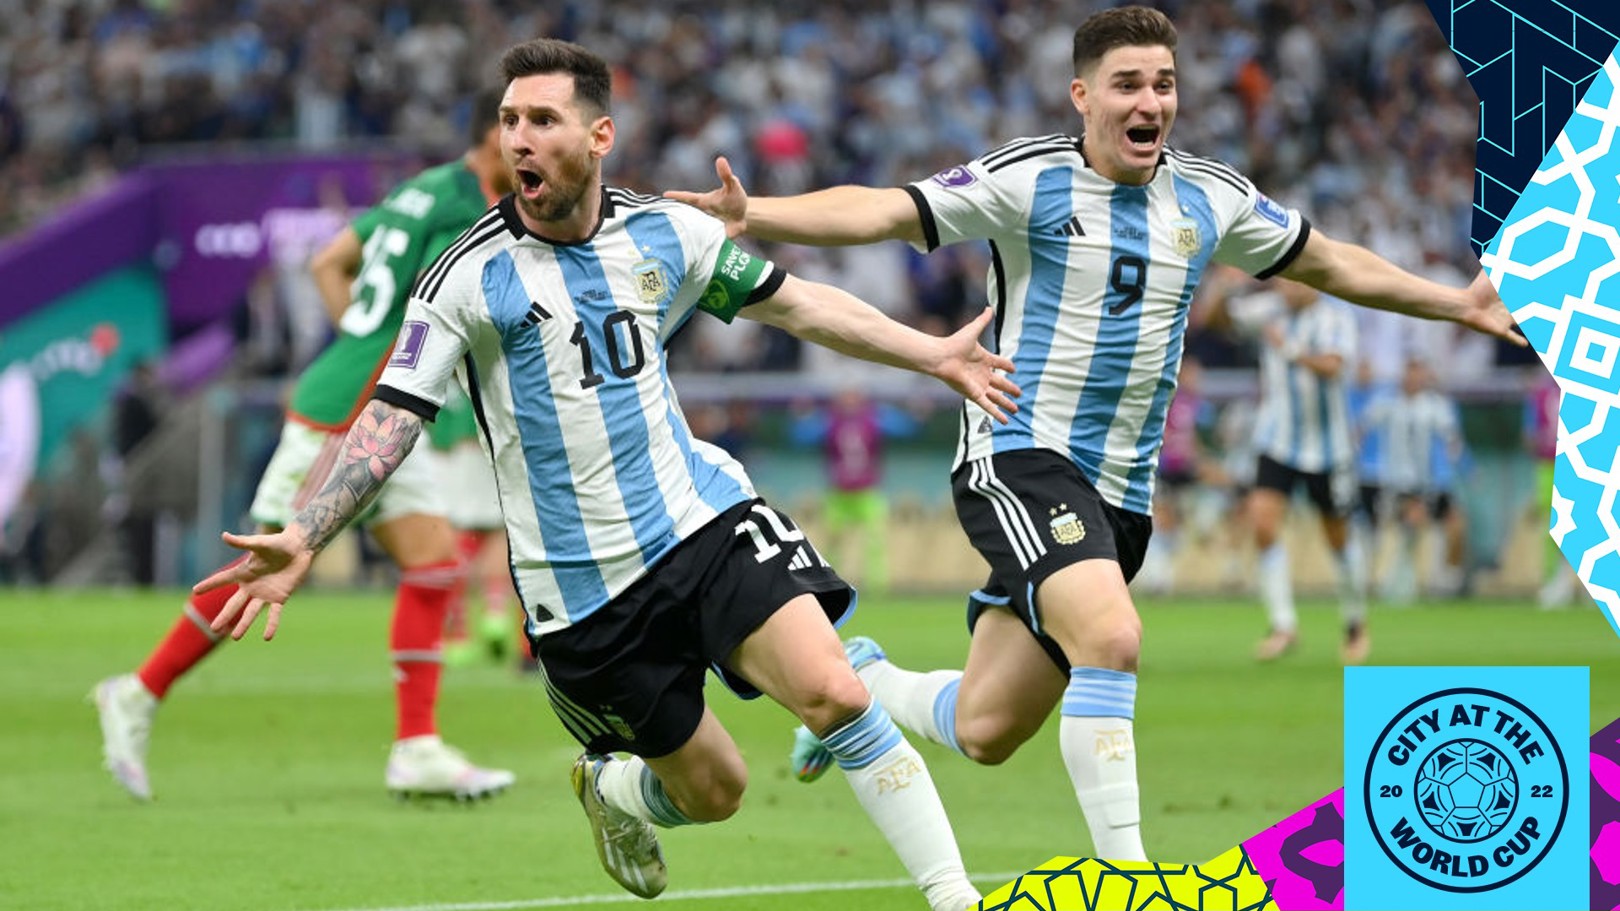 Lionel Messi scores incredible goal in Argentina training ahead of